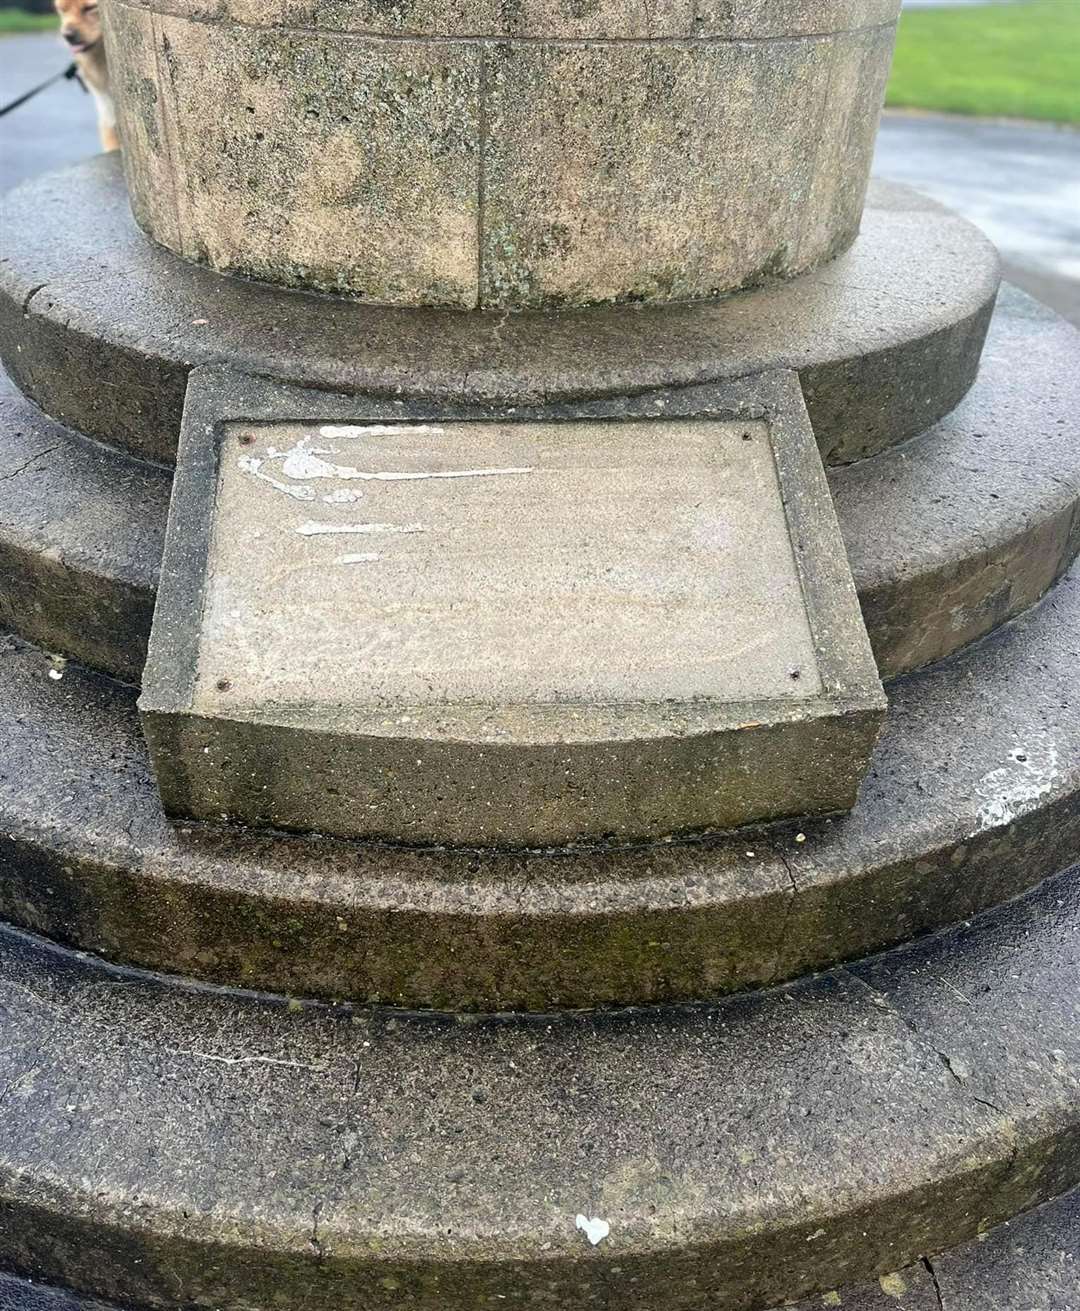 The copper-plated signs appear to have been ripped from the General Gordon statue